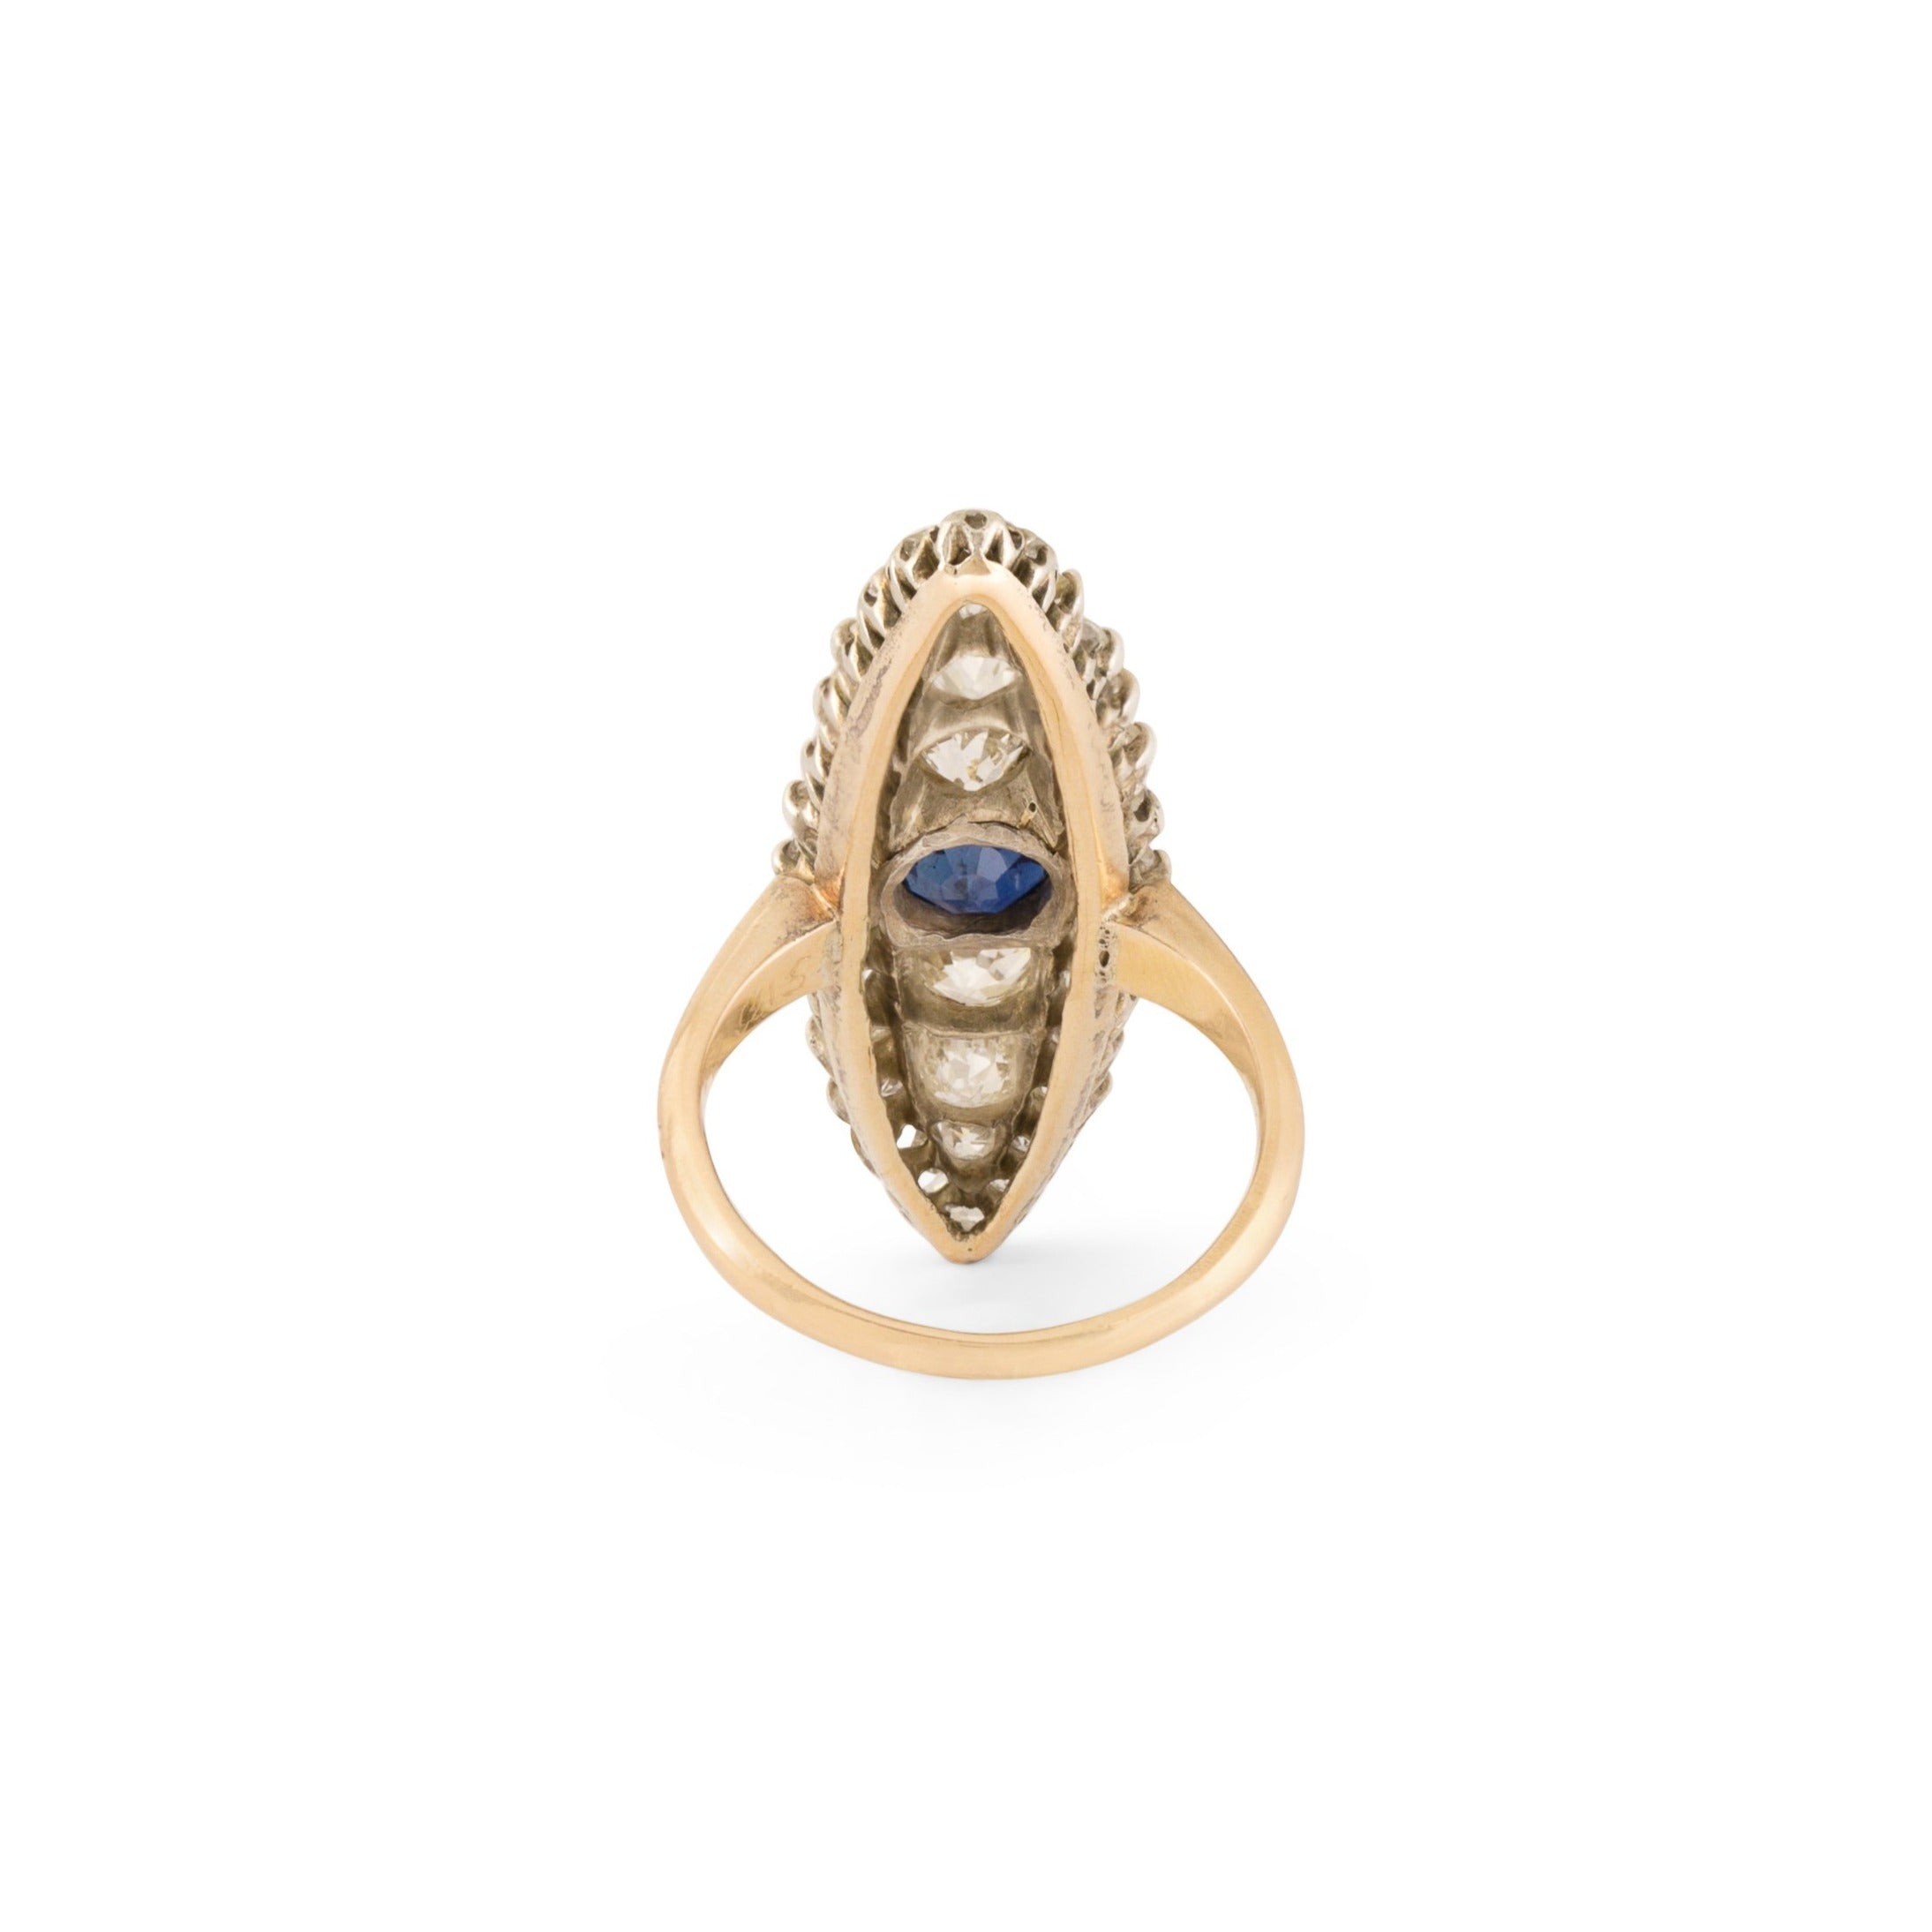 Victorian Old Mine Cut Diamond and Sapphire Large Navette Ring